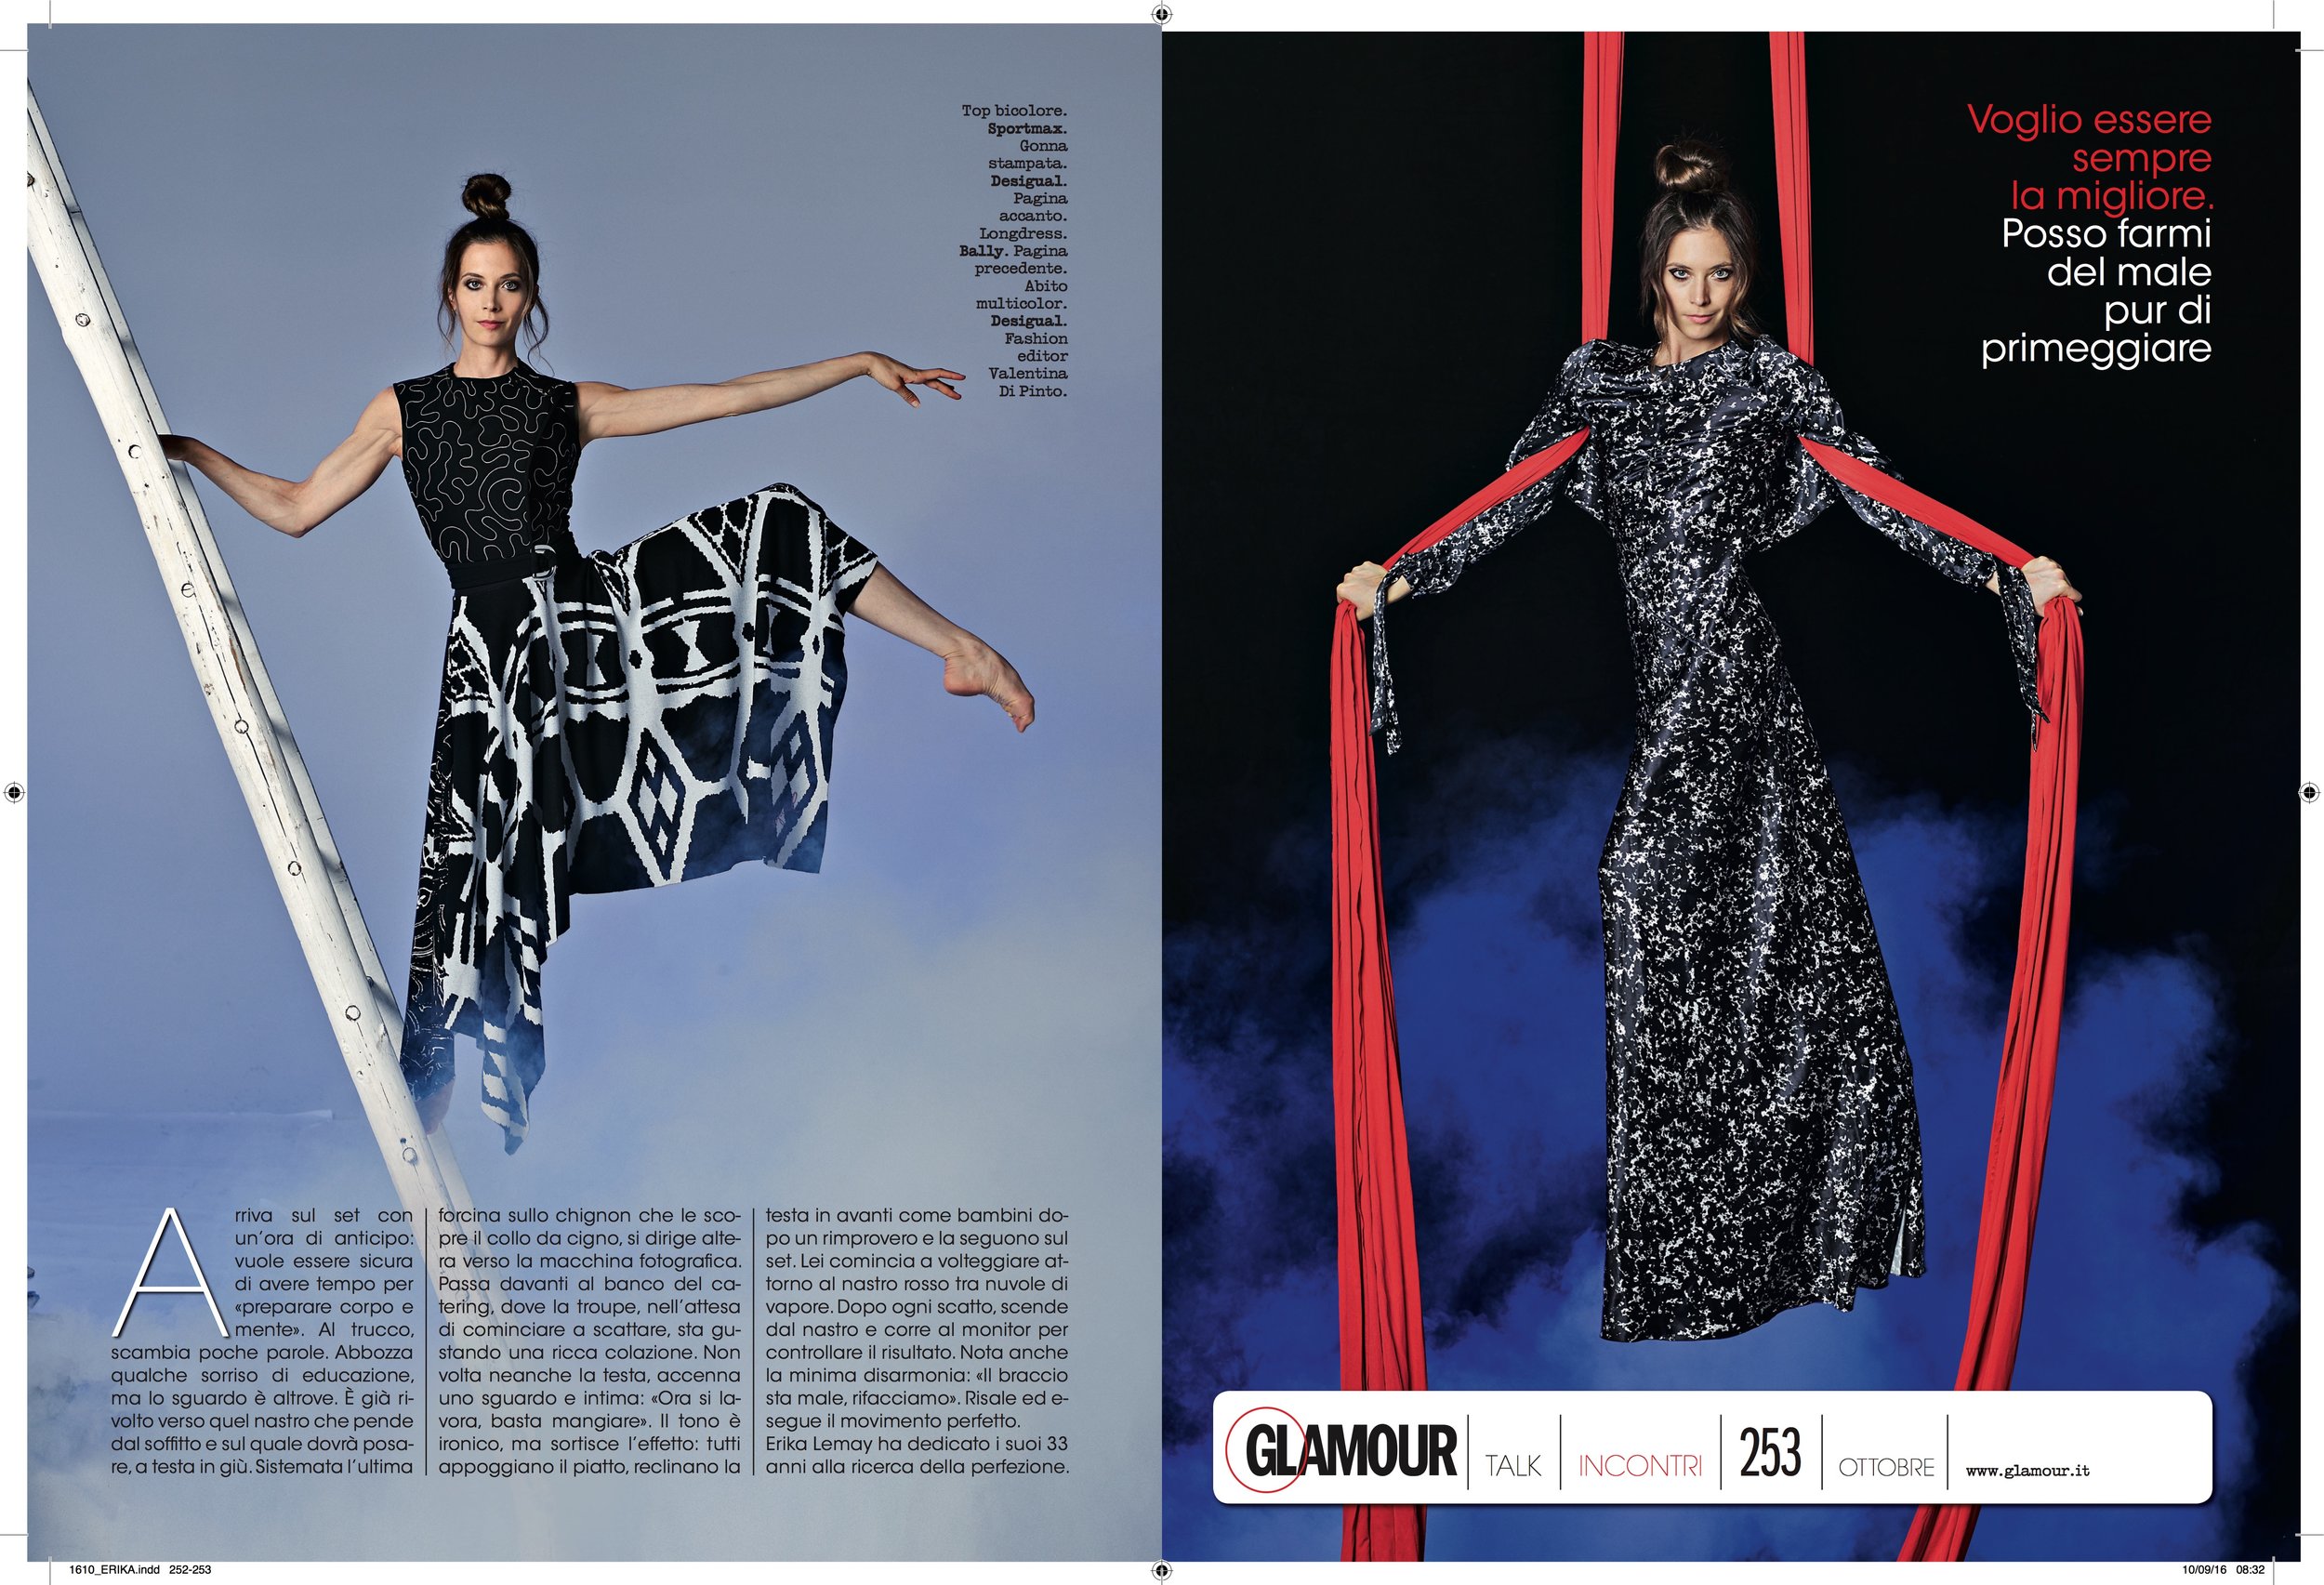 Glamour page 2-3.jpg